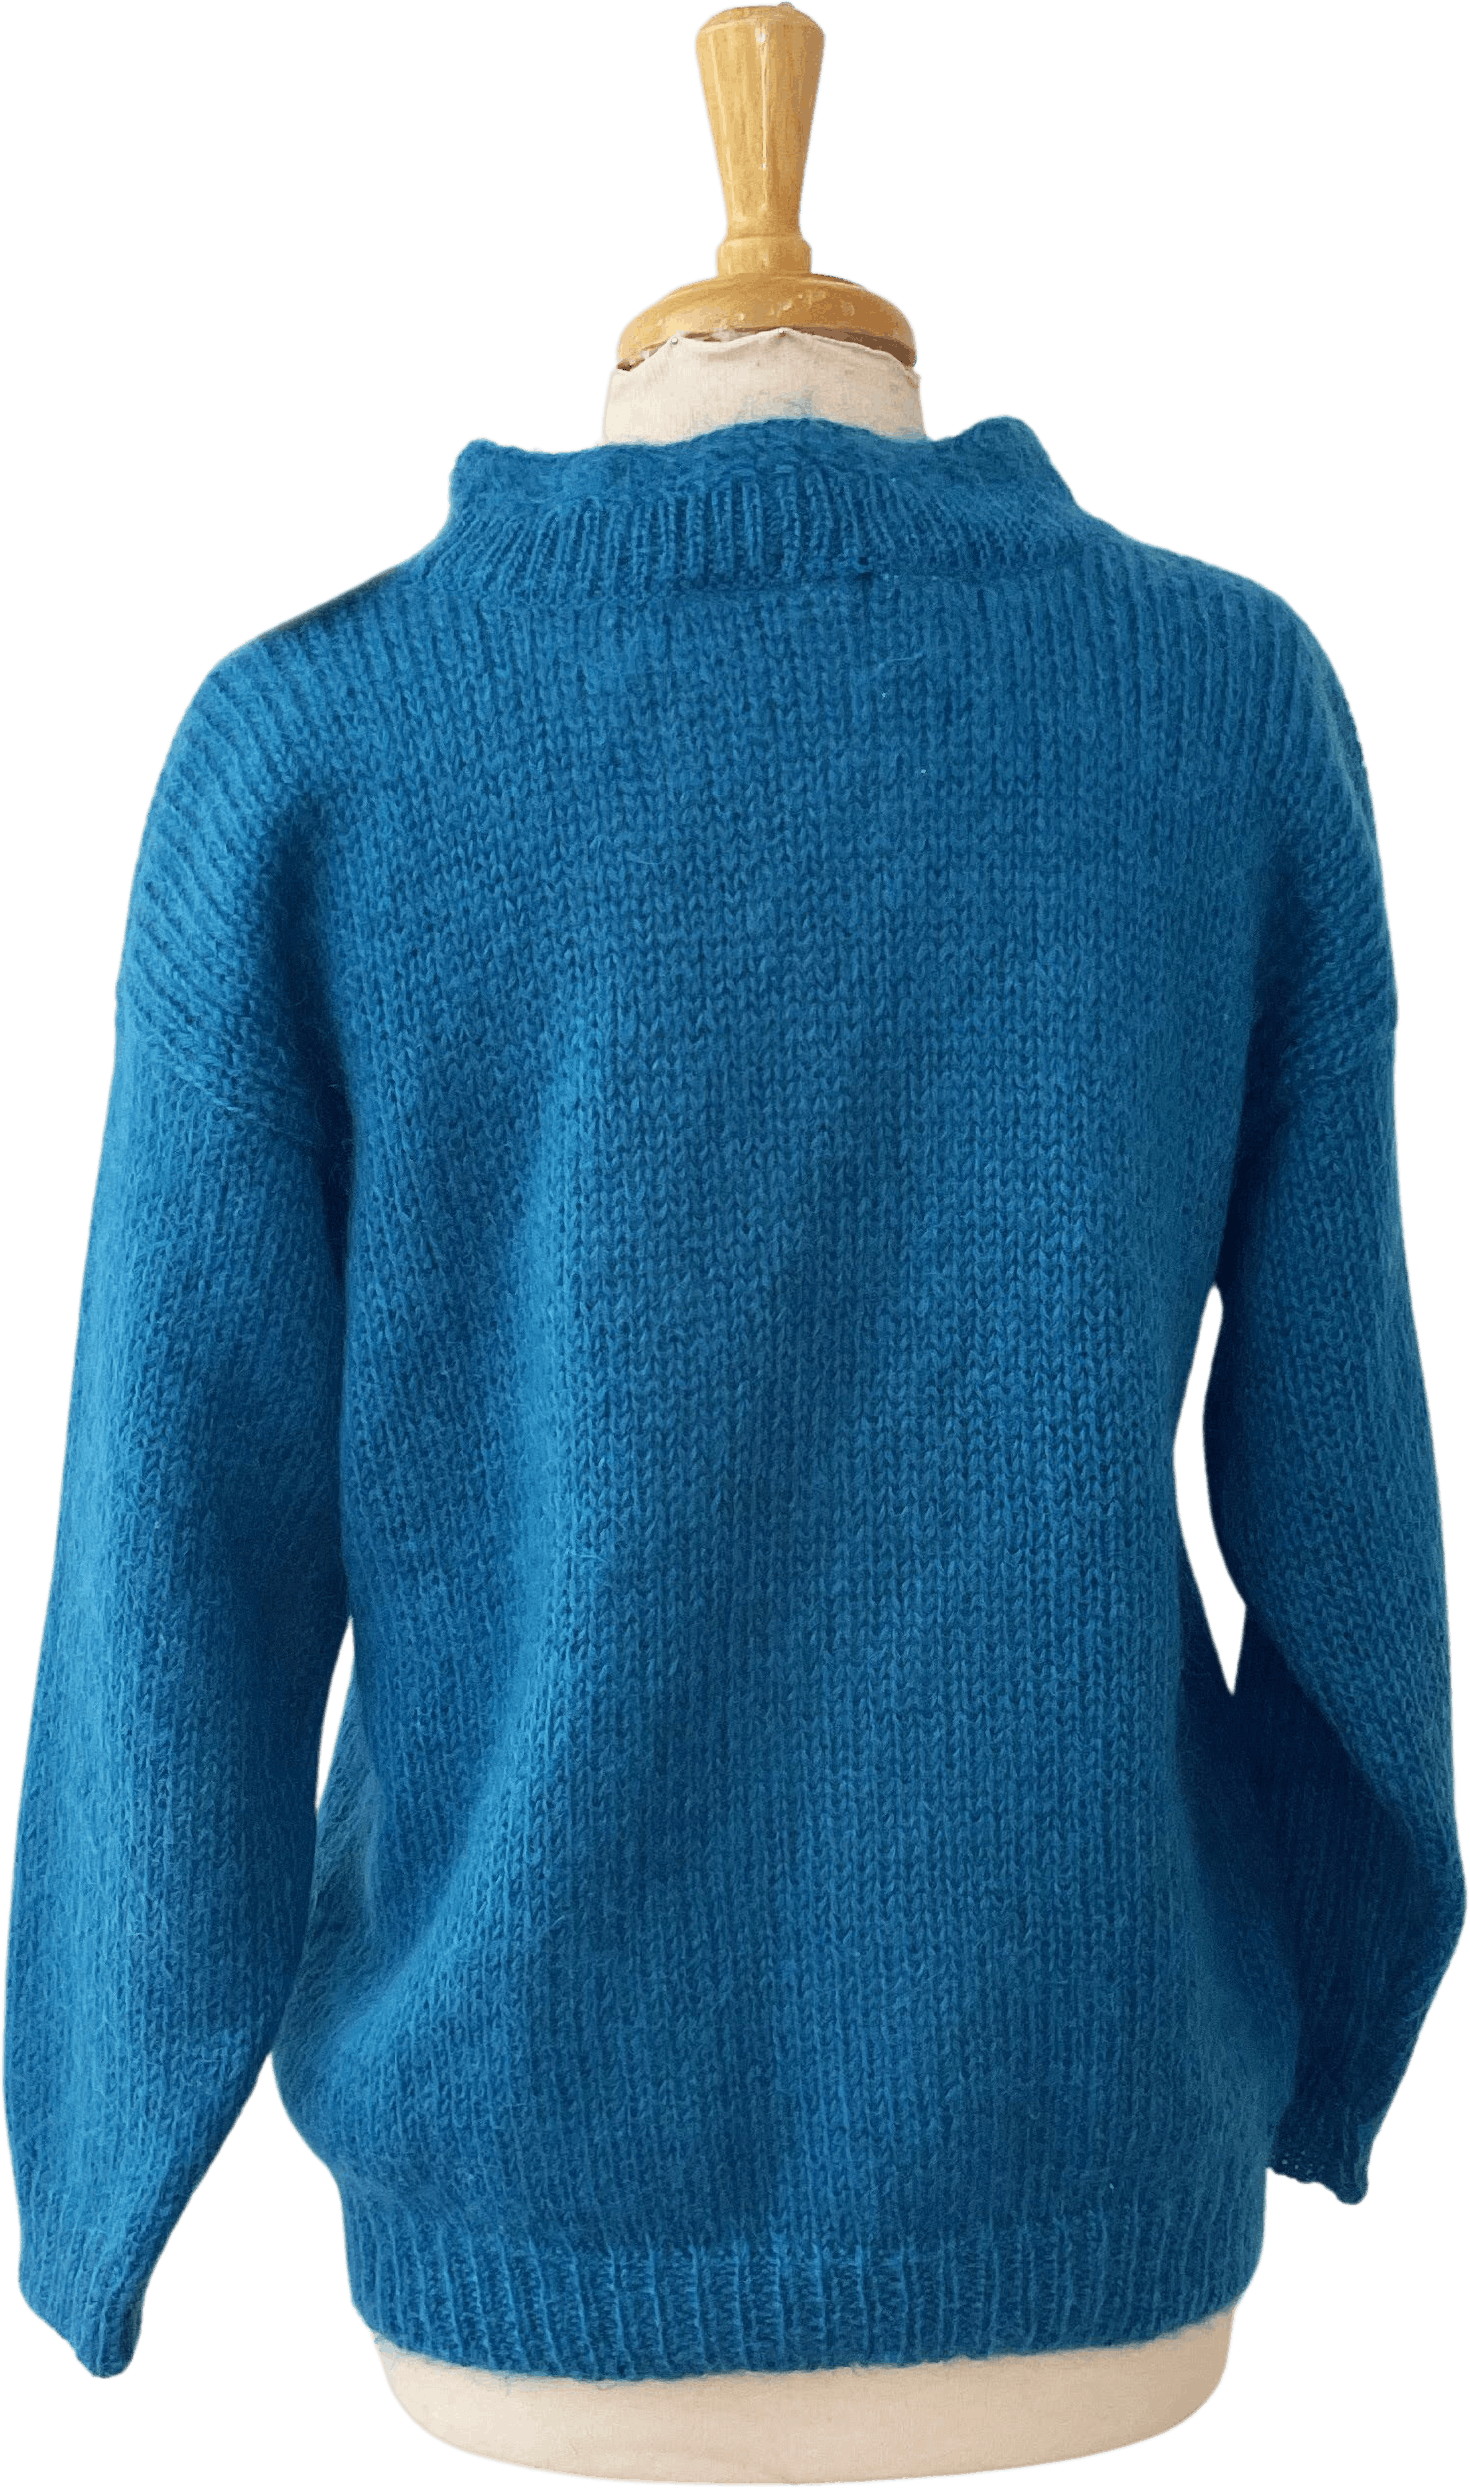 Vintage 80’s Cerulean Blue Chunky Knit Mohair Blend Sweater by Rafaella ...